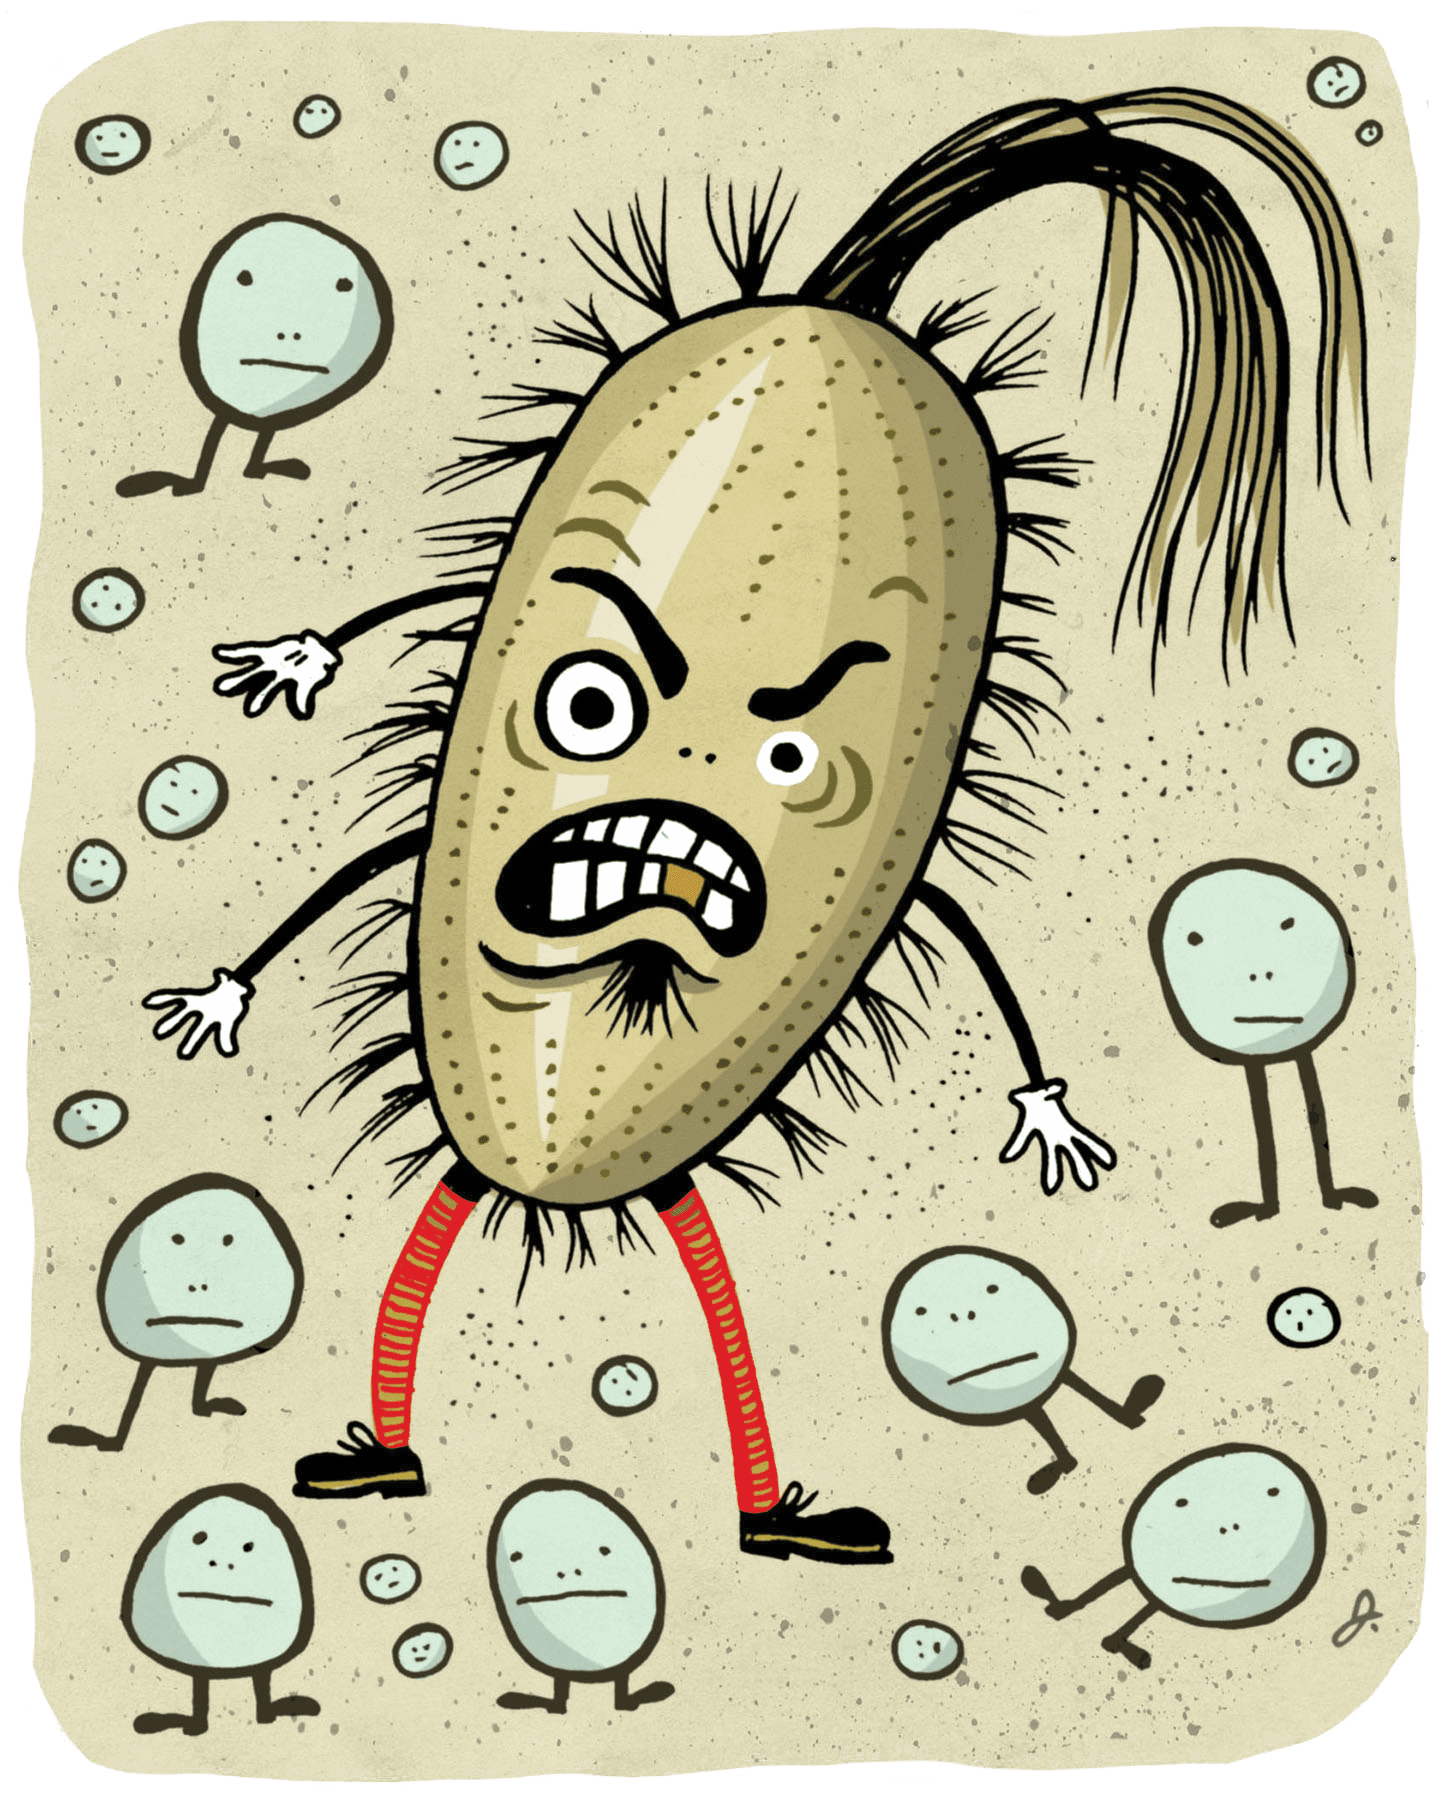 An illustration of an anthropomorphic bacteria with an angry face and a mohawk